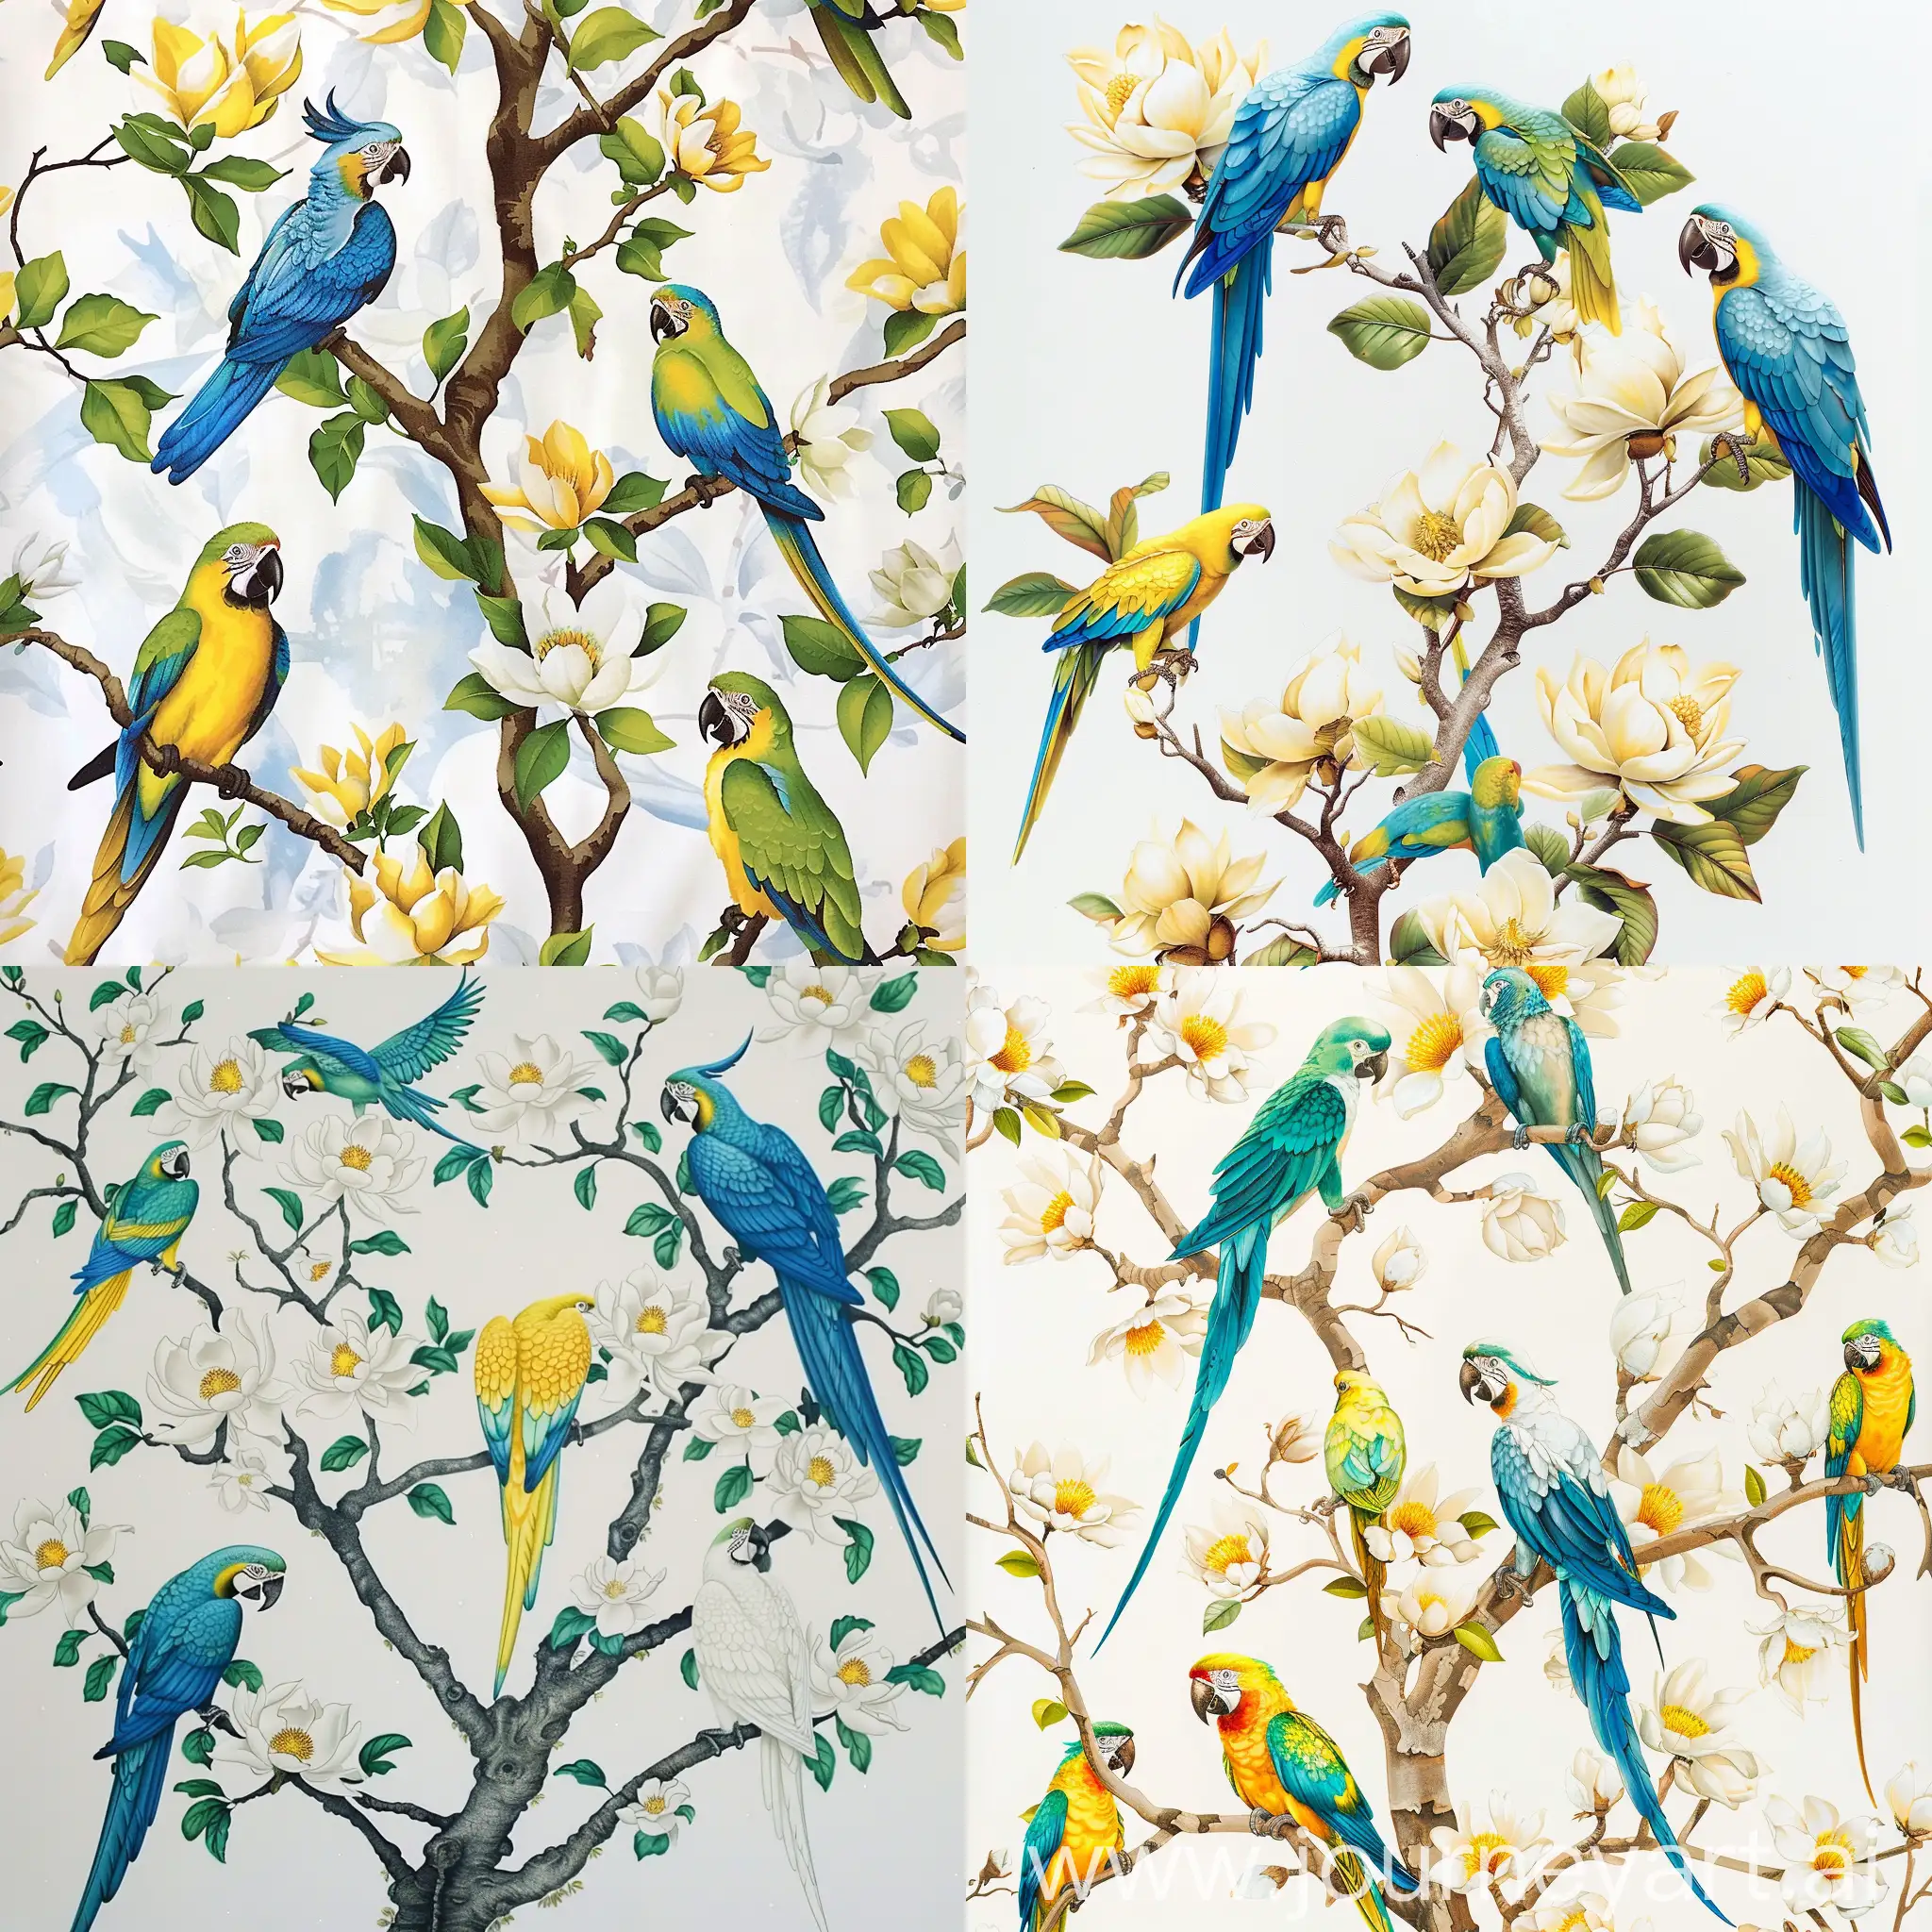 Vibrant-Magnolia-Blossom-Tree-with-Parrots-in-Blue-Yellow-Green-and-Turquoise-on-White-Background